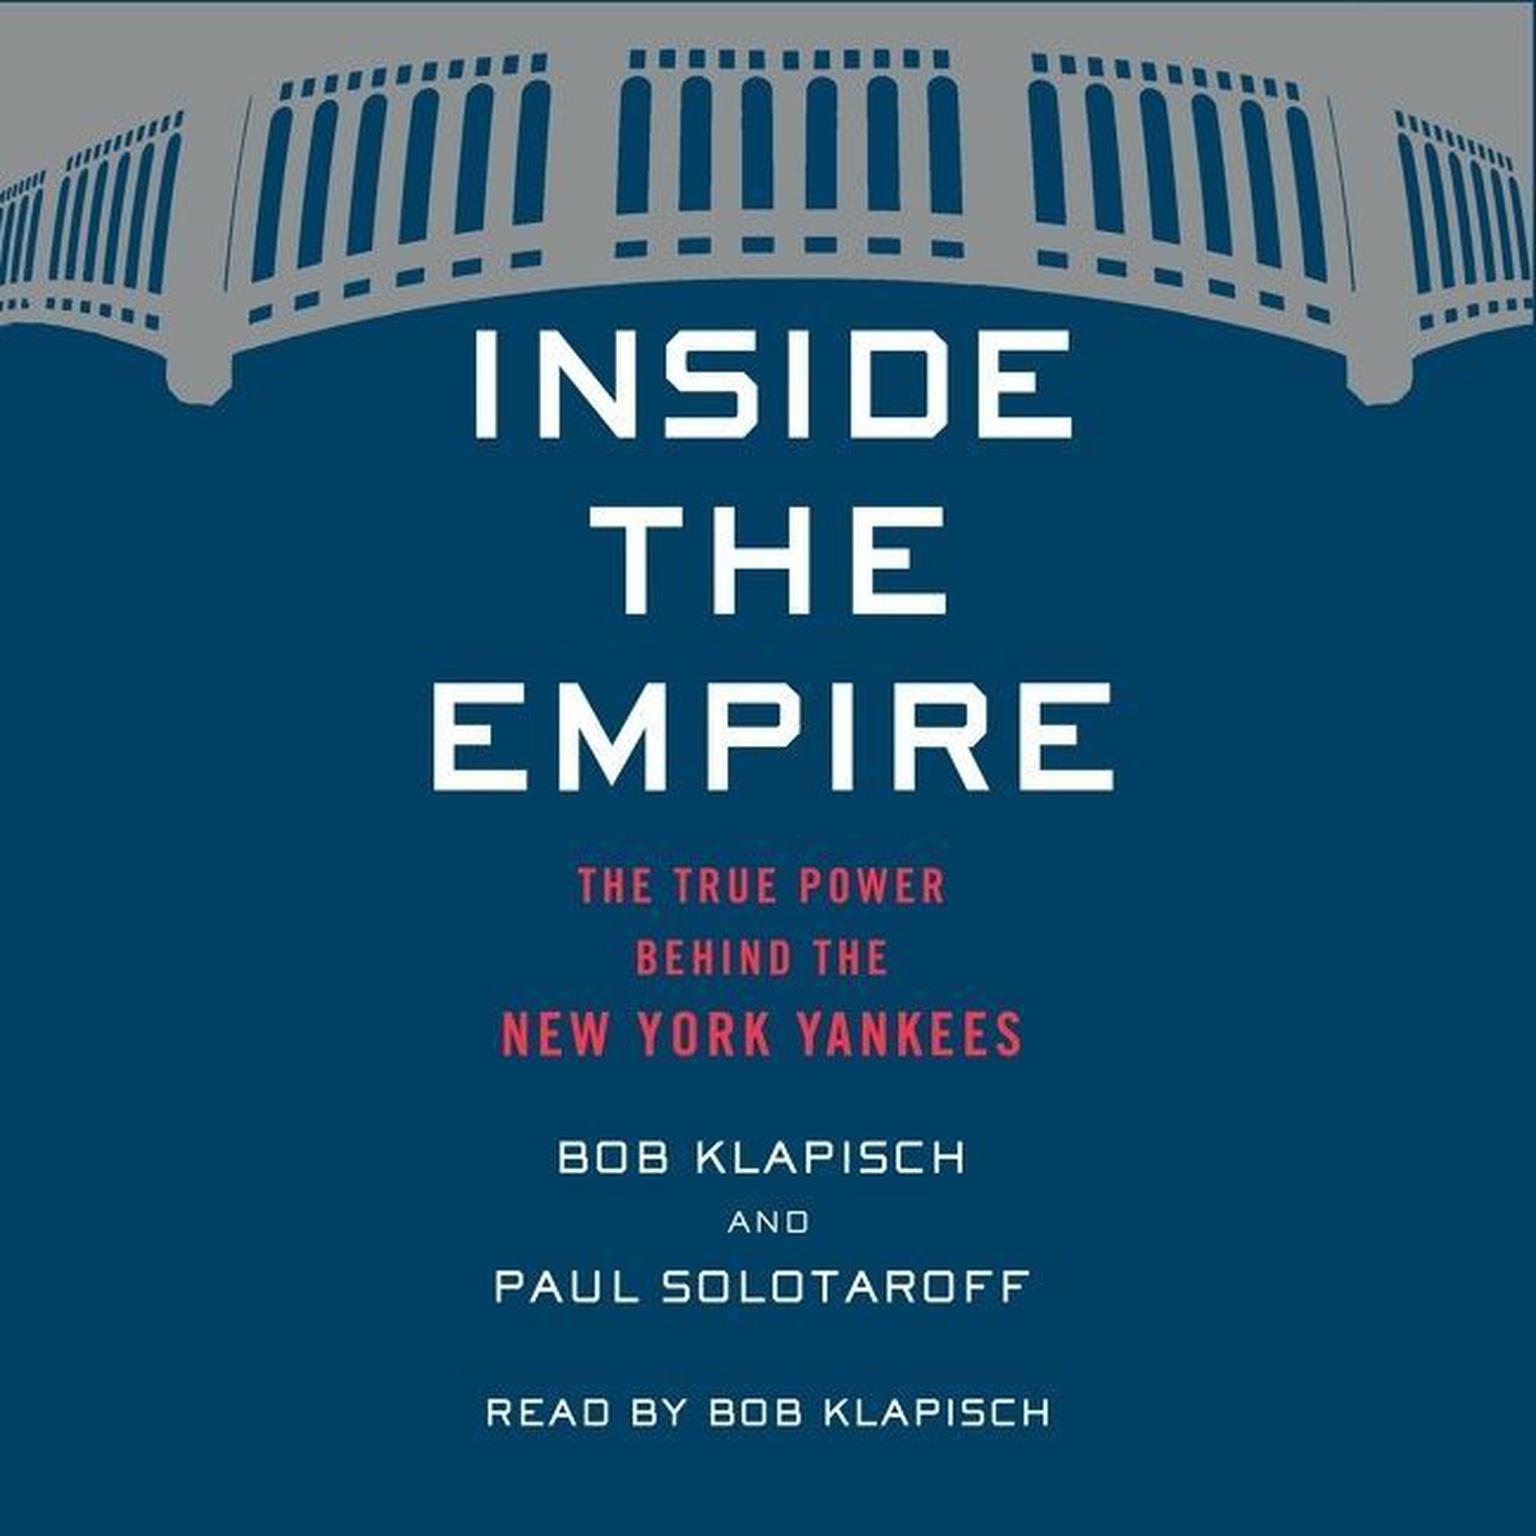 Inside The Empire: The True Power Behind the New York Yankees Audiobook, by Bob Klapisch